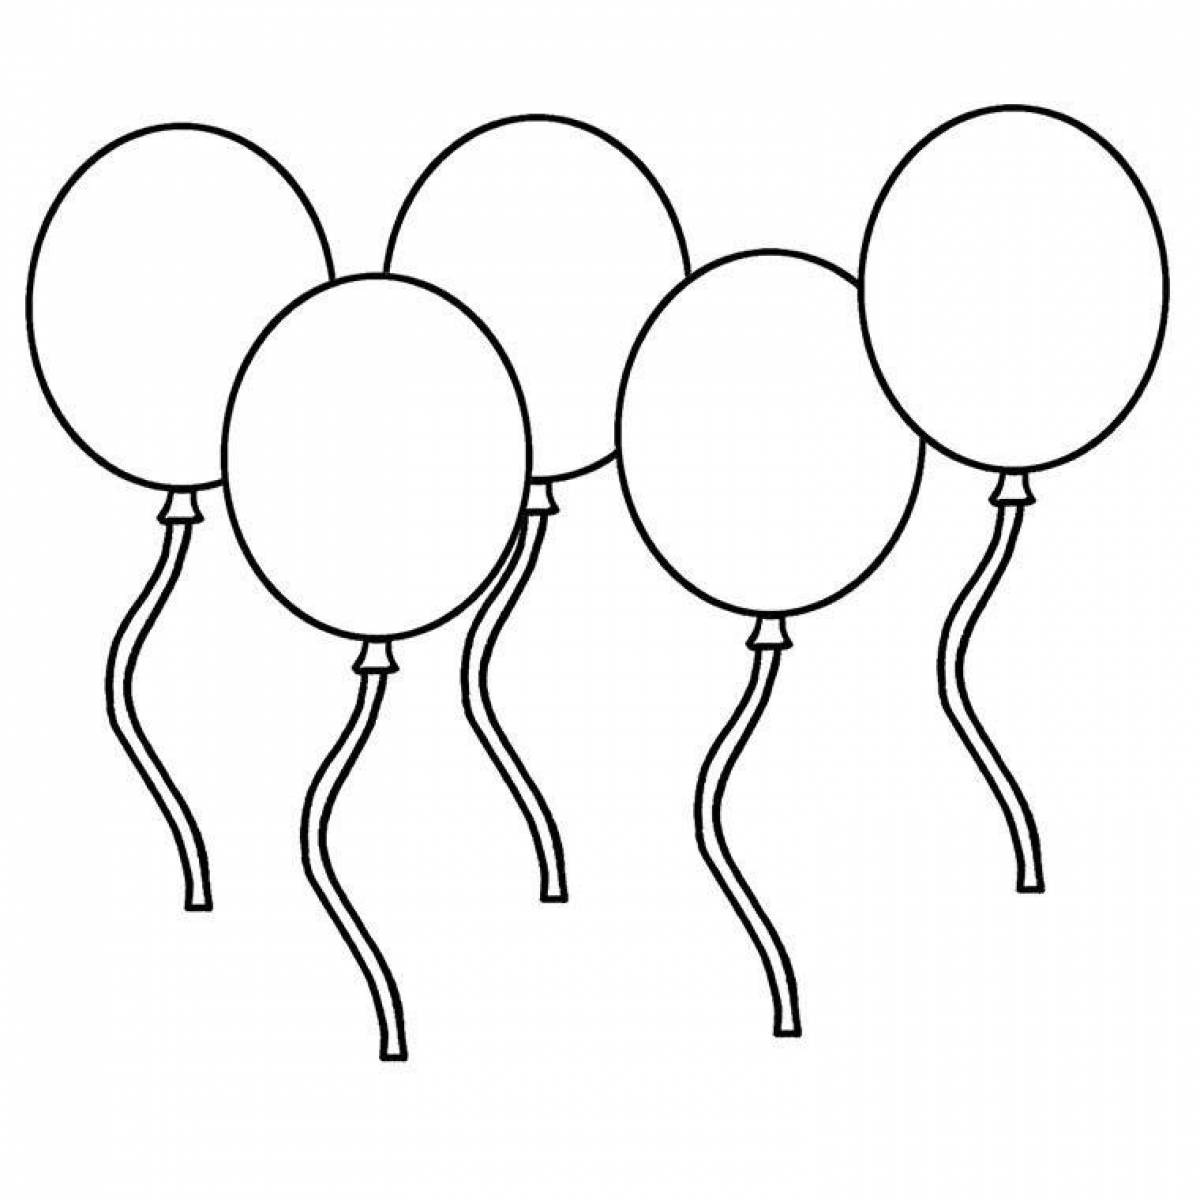 Playful balloon coloring page for kids